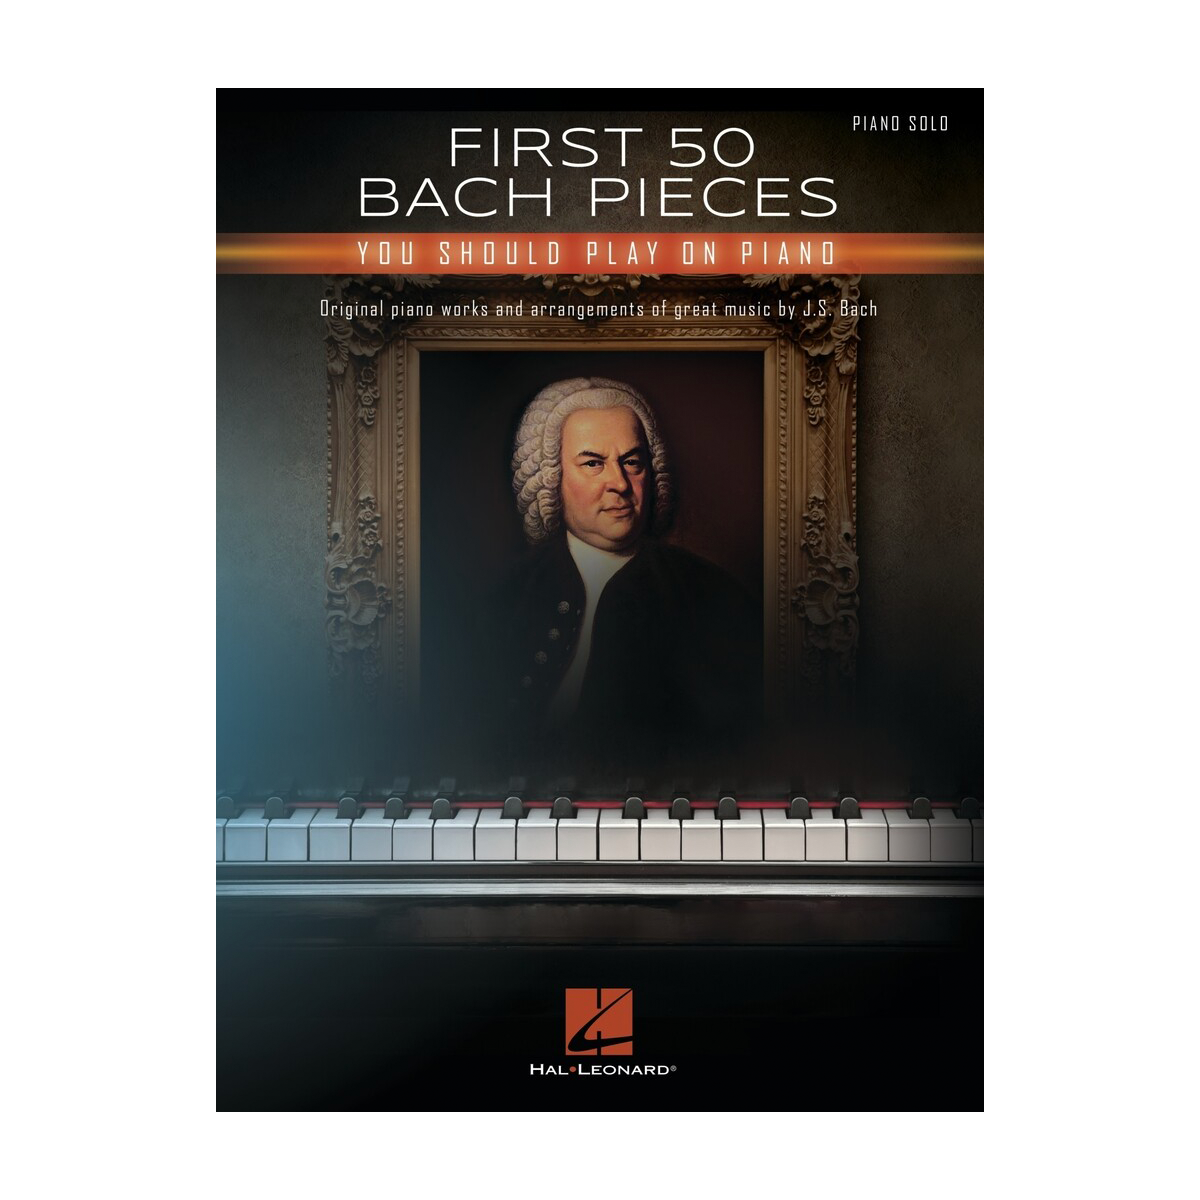 FIRST 50 BACH PIECES YOU SHOULD PLAY ON THE PIANO